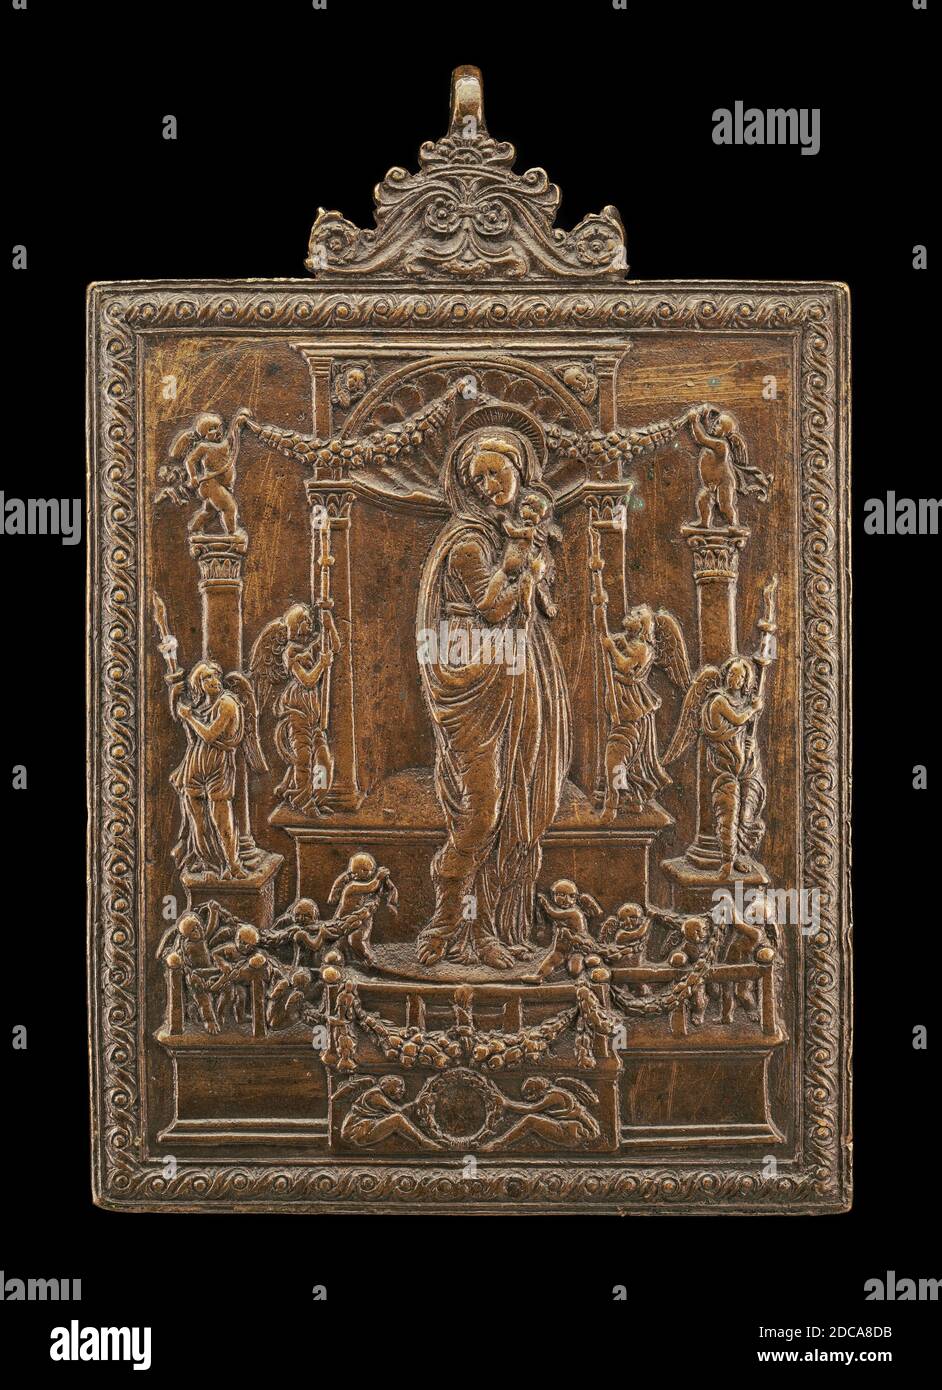 Paduan 15th Century, (artist), Madonna and Child with Angels, c. 1475, bronze, overall (with finial and suspension loop): 13.32 x 8.86 cm (5 1/4 x 3 1/2 in.), overall (height without suspension loop): 12.5 cm (4 15/16 in.), overall (height without finial and suspension loop): 10.84 cm (4 1/4 in.), overall (inner field): 9.55 x 7.55 cm (3 3/4 x 3 in.), gross weight: 227.32 gr (0.501 lb Stock Photo